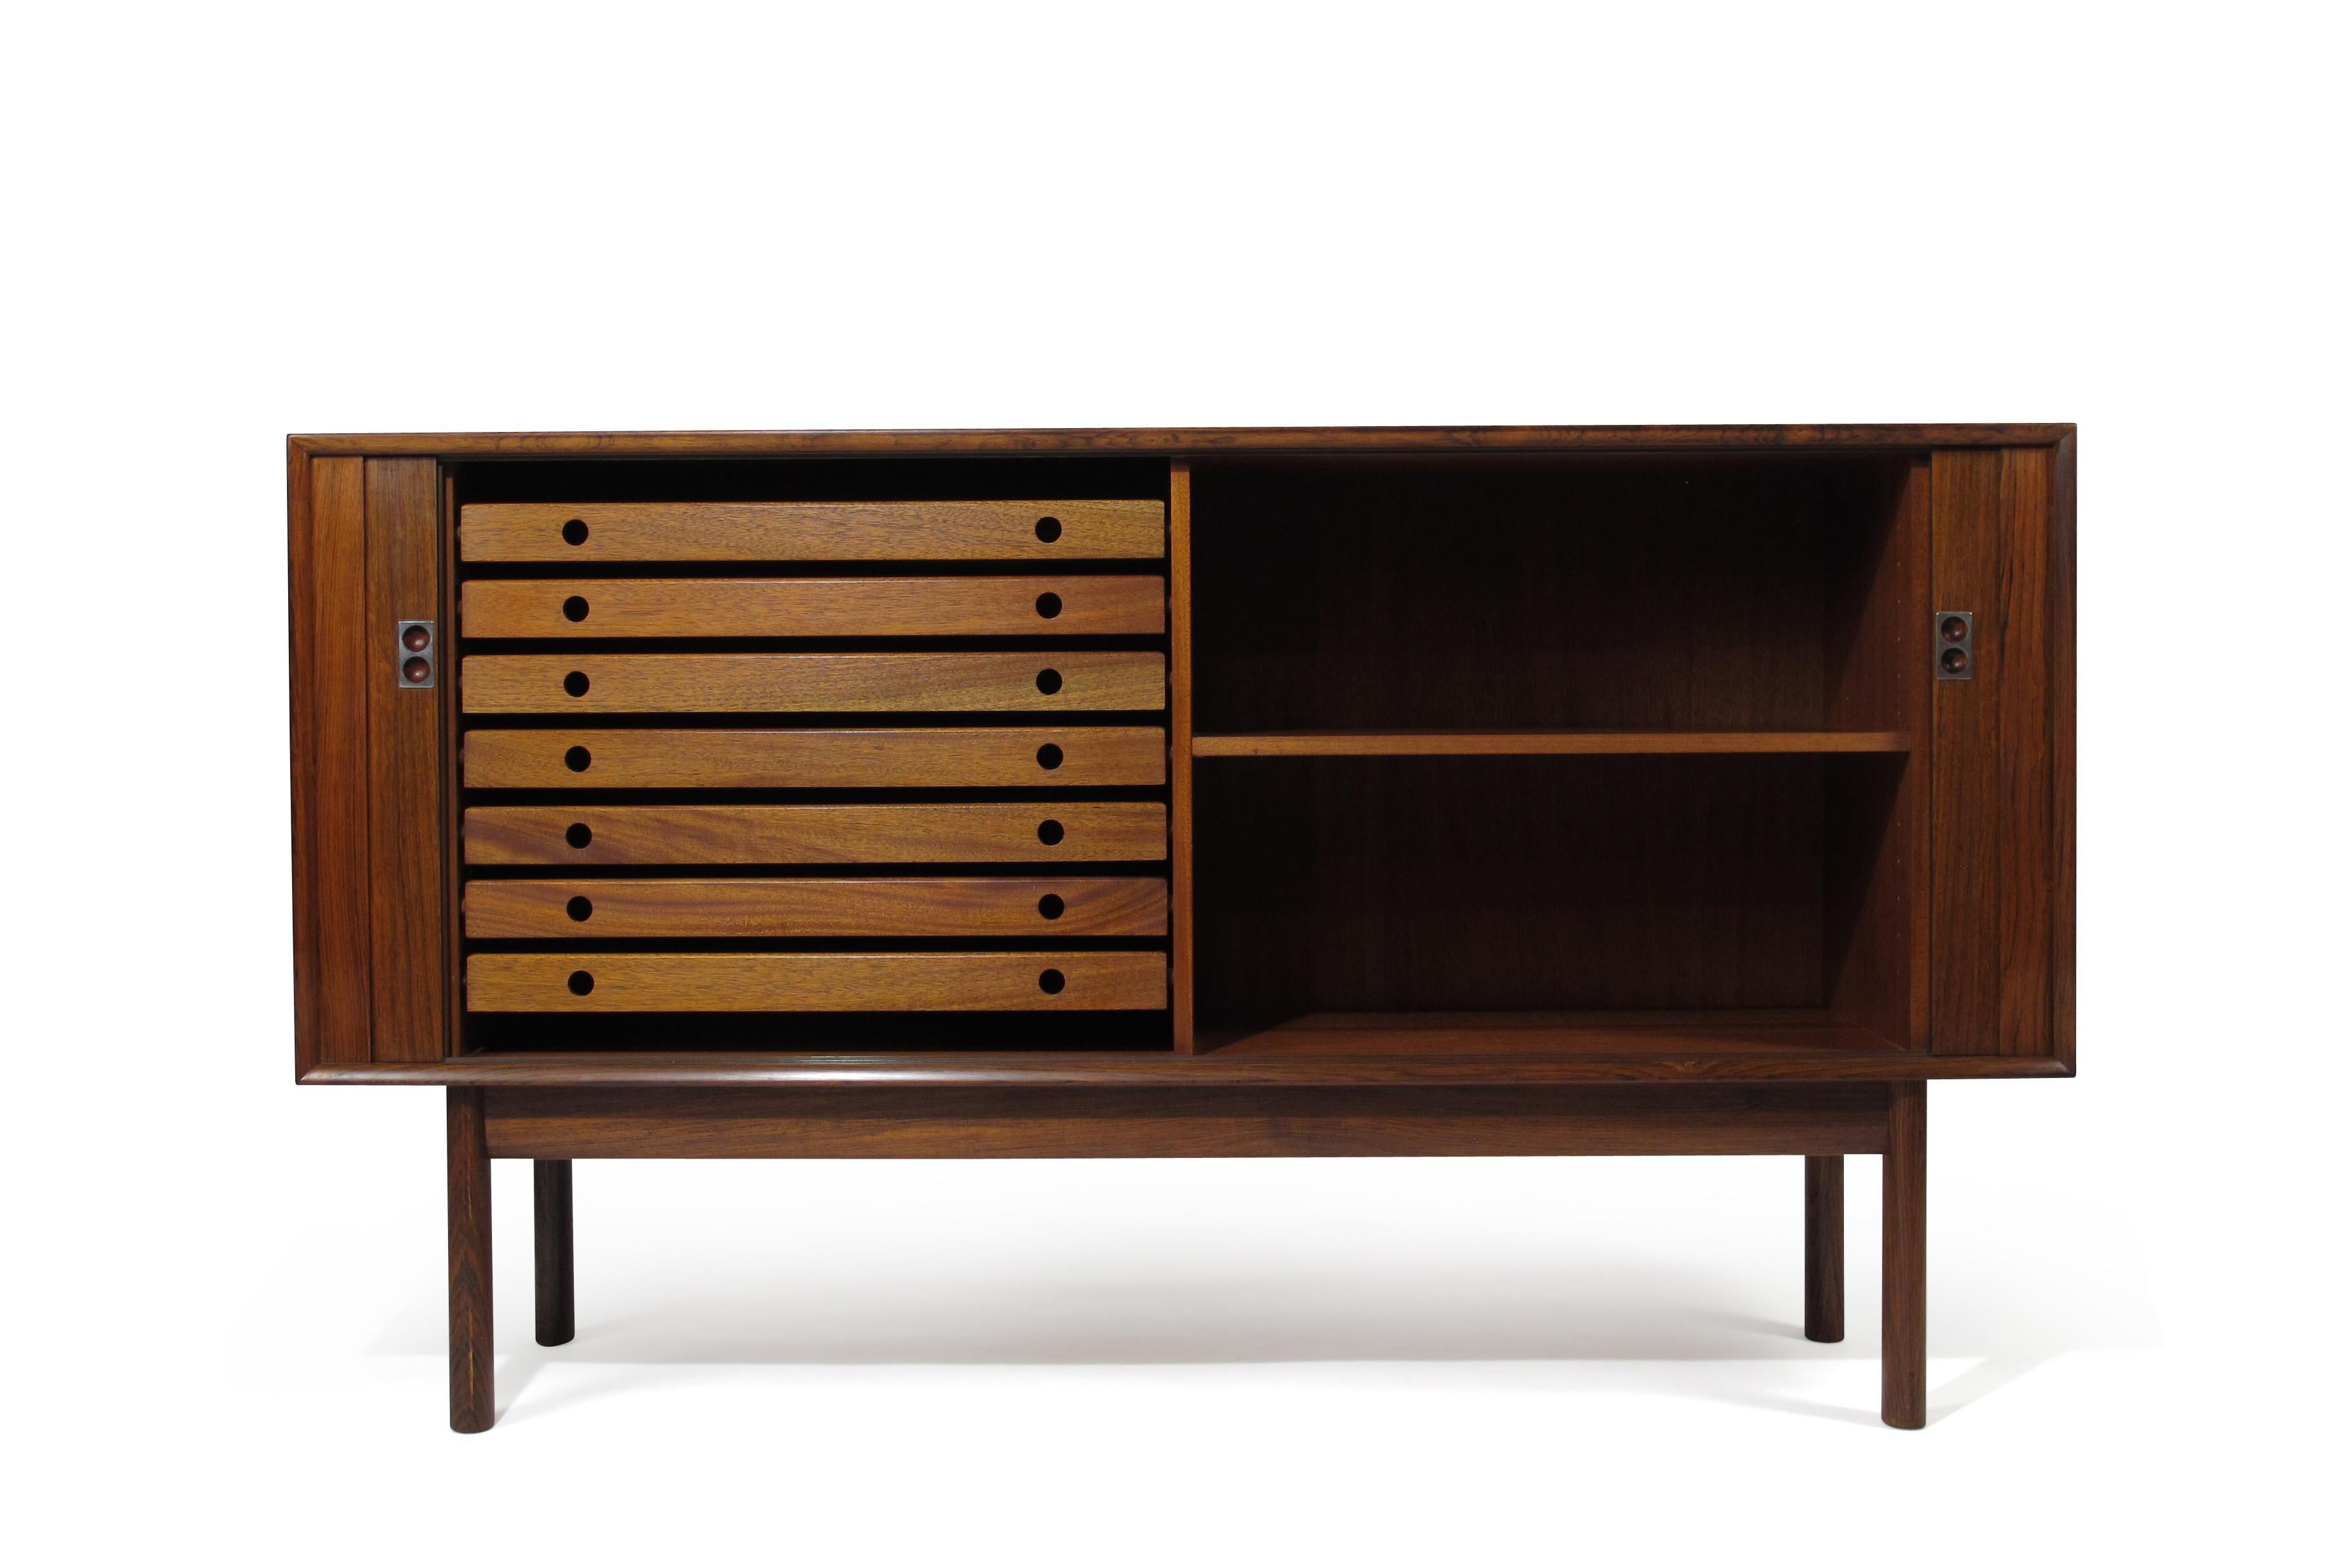 Arne Vodder for Sibast rosewood credenza with mitered corners, sliding tambour doors and metal pulls. The interior features a mahogany interior with adjustable shelf and seven silverware drawers. The cabinet has been lightly restored and in good